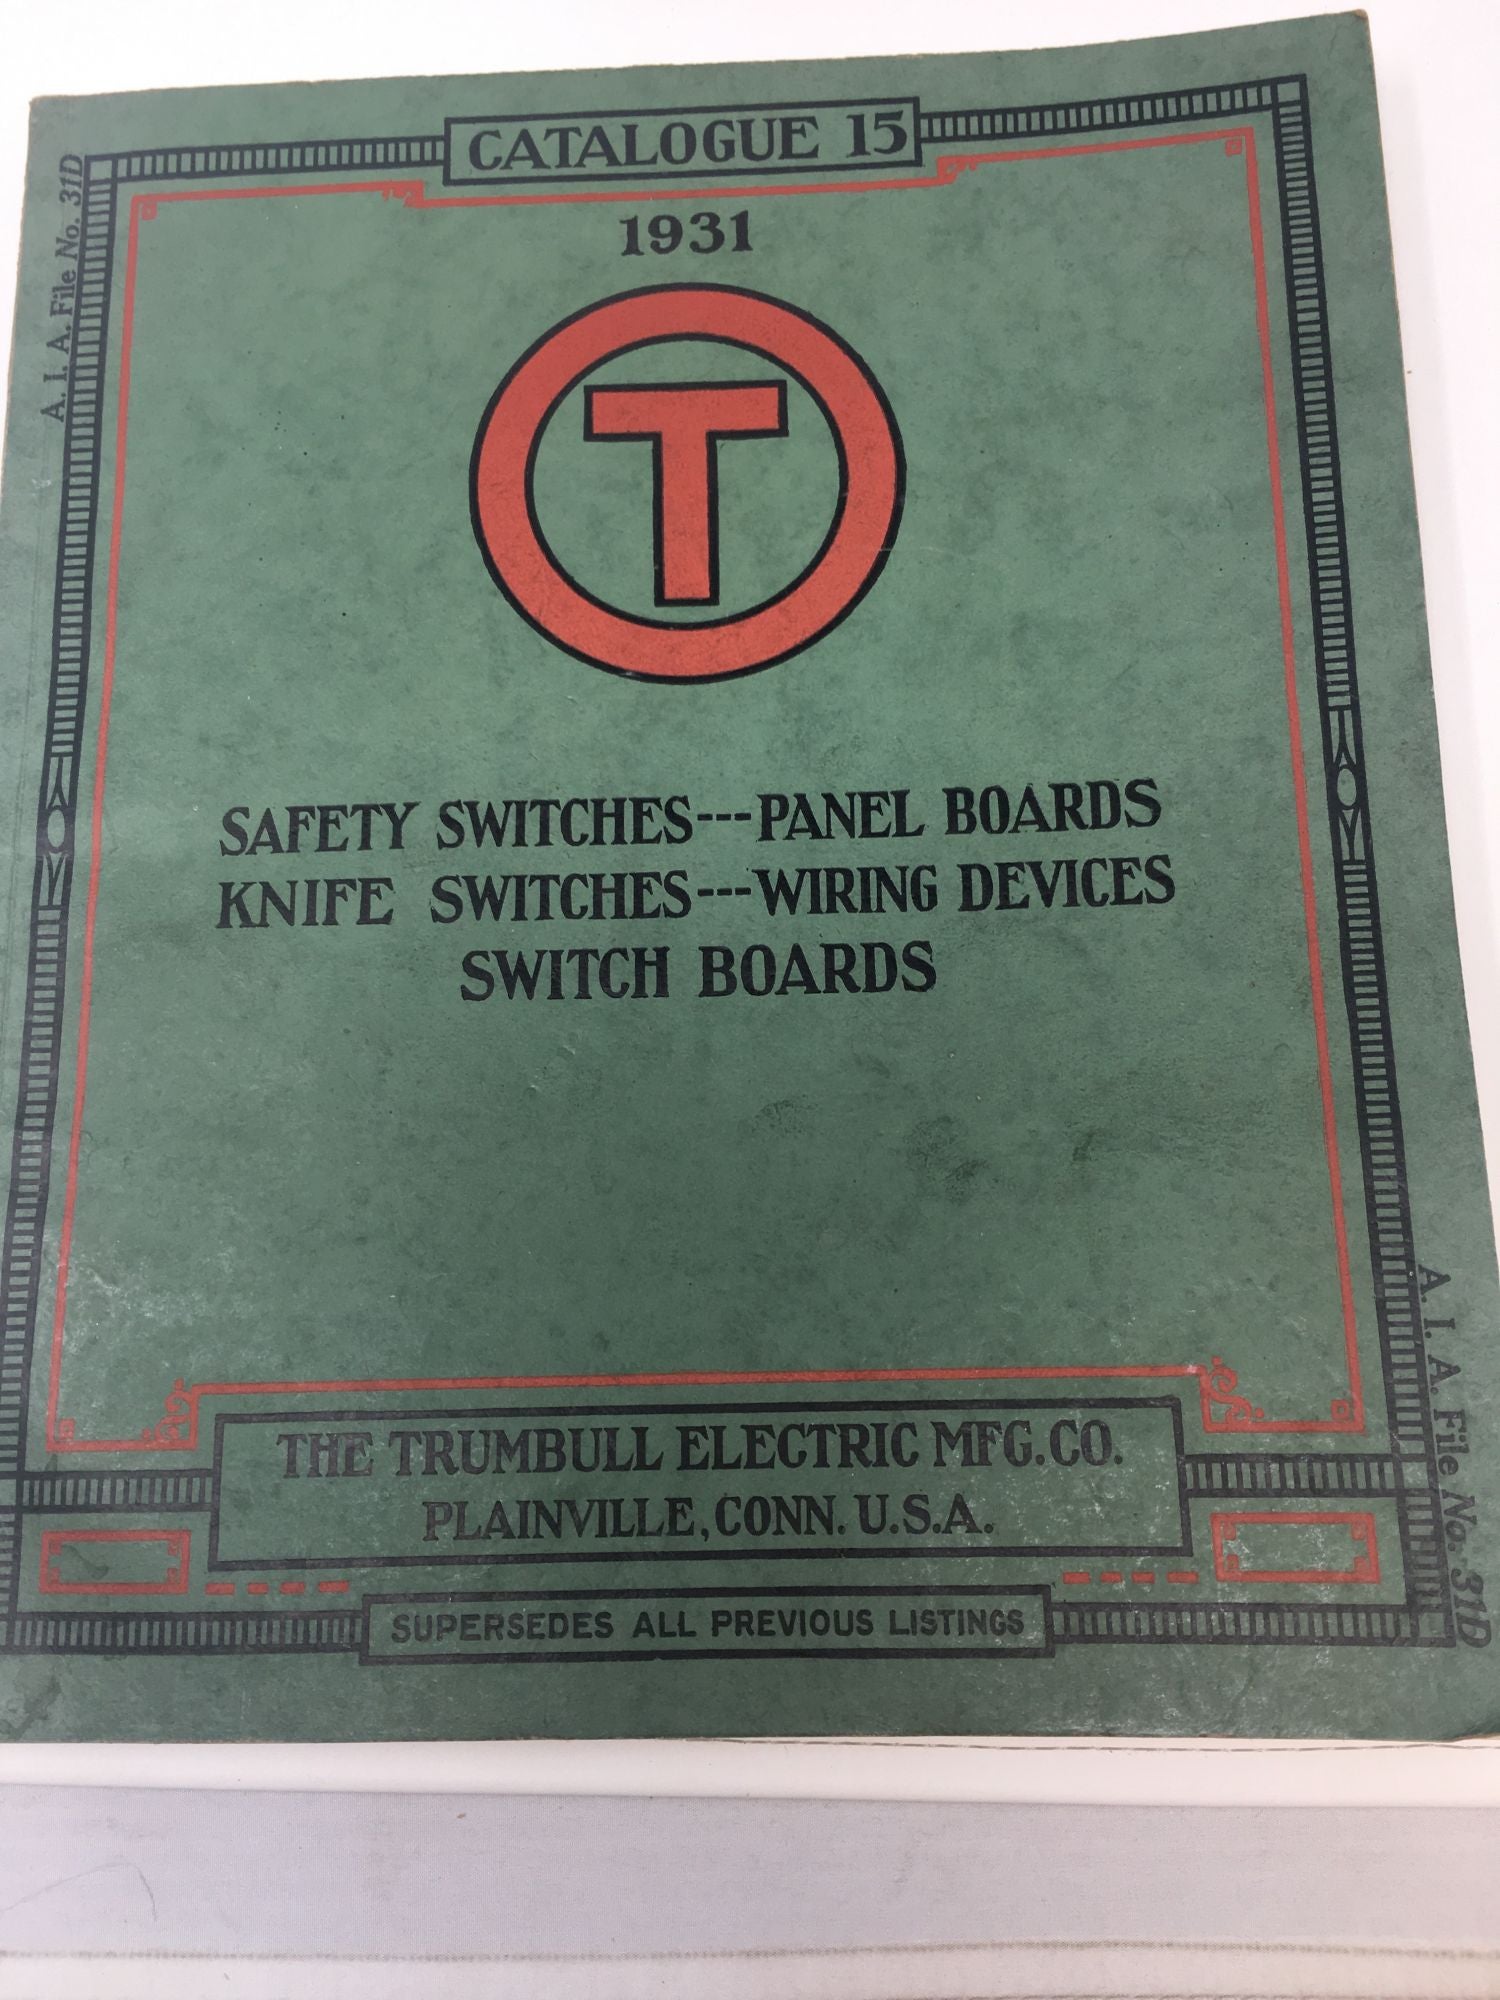 Trumbull Electric - The Trumbull Electric Mfg. Co. Catalog 15 -- 1931; Manufacturers of Complete Interior Electrical Distribution and Control Systems